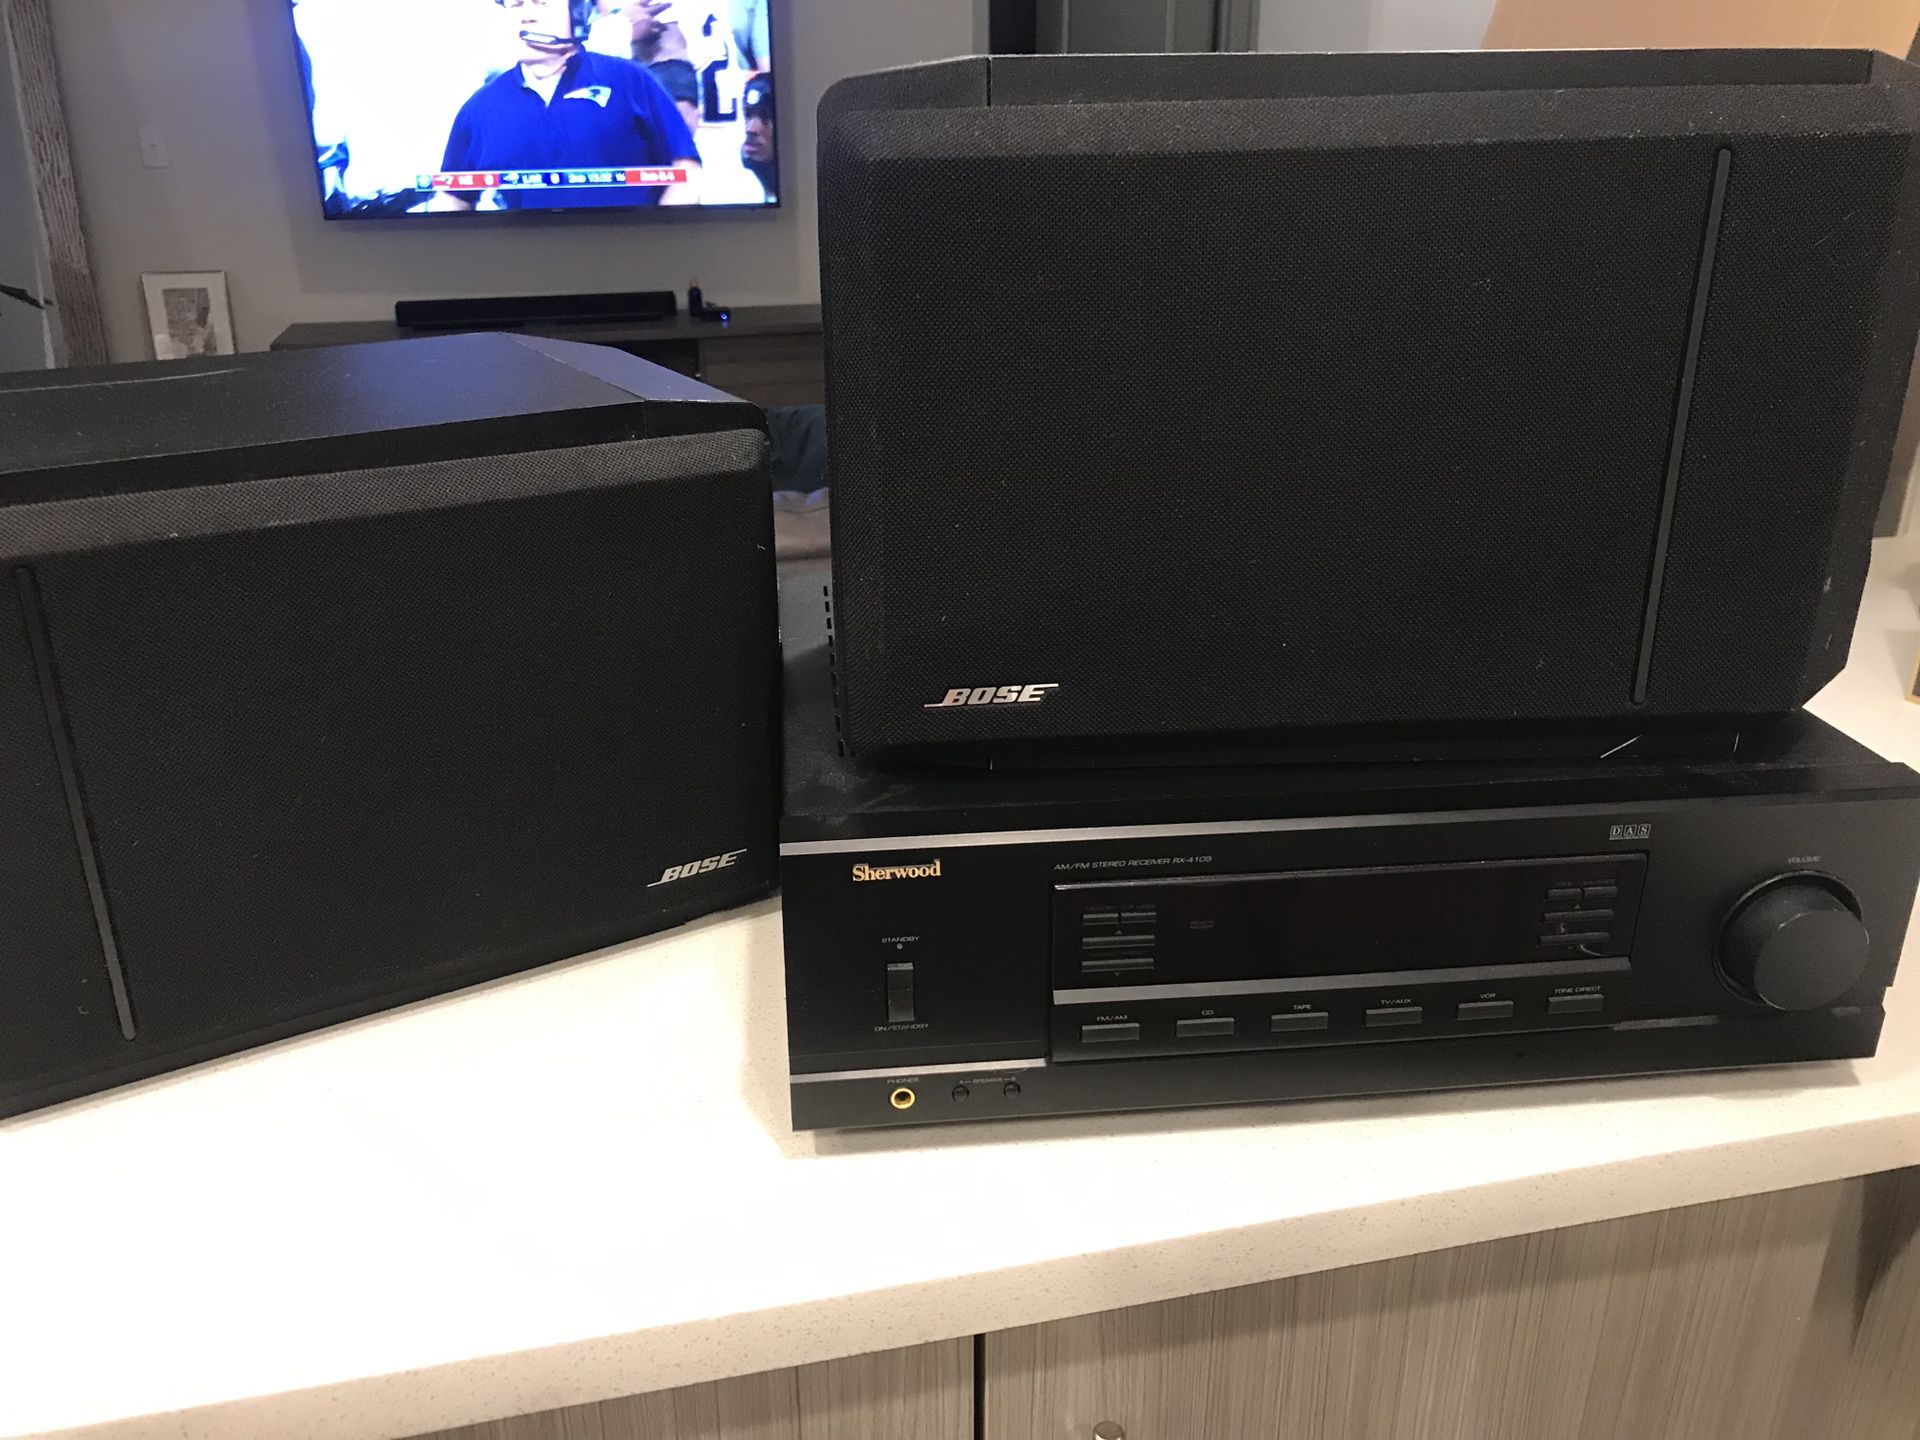 Pair Of Bose 301 Series IV Direct Reflecting Speakers and Sherwood AM/FM stereo Receiver RX-4105